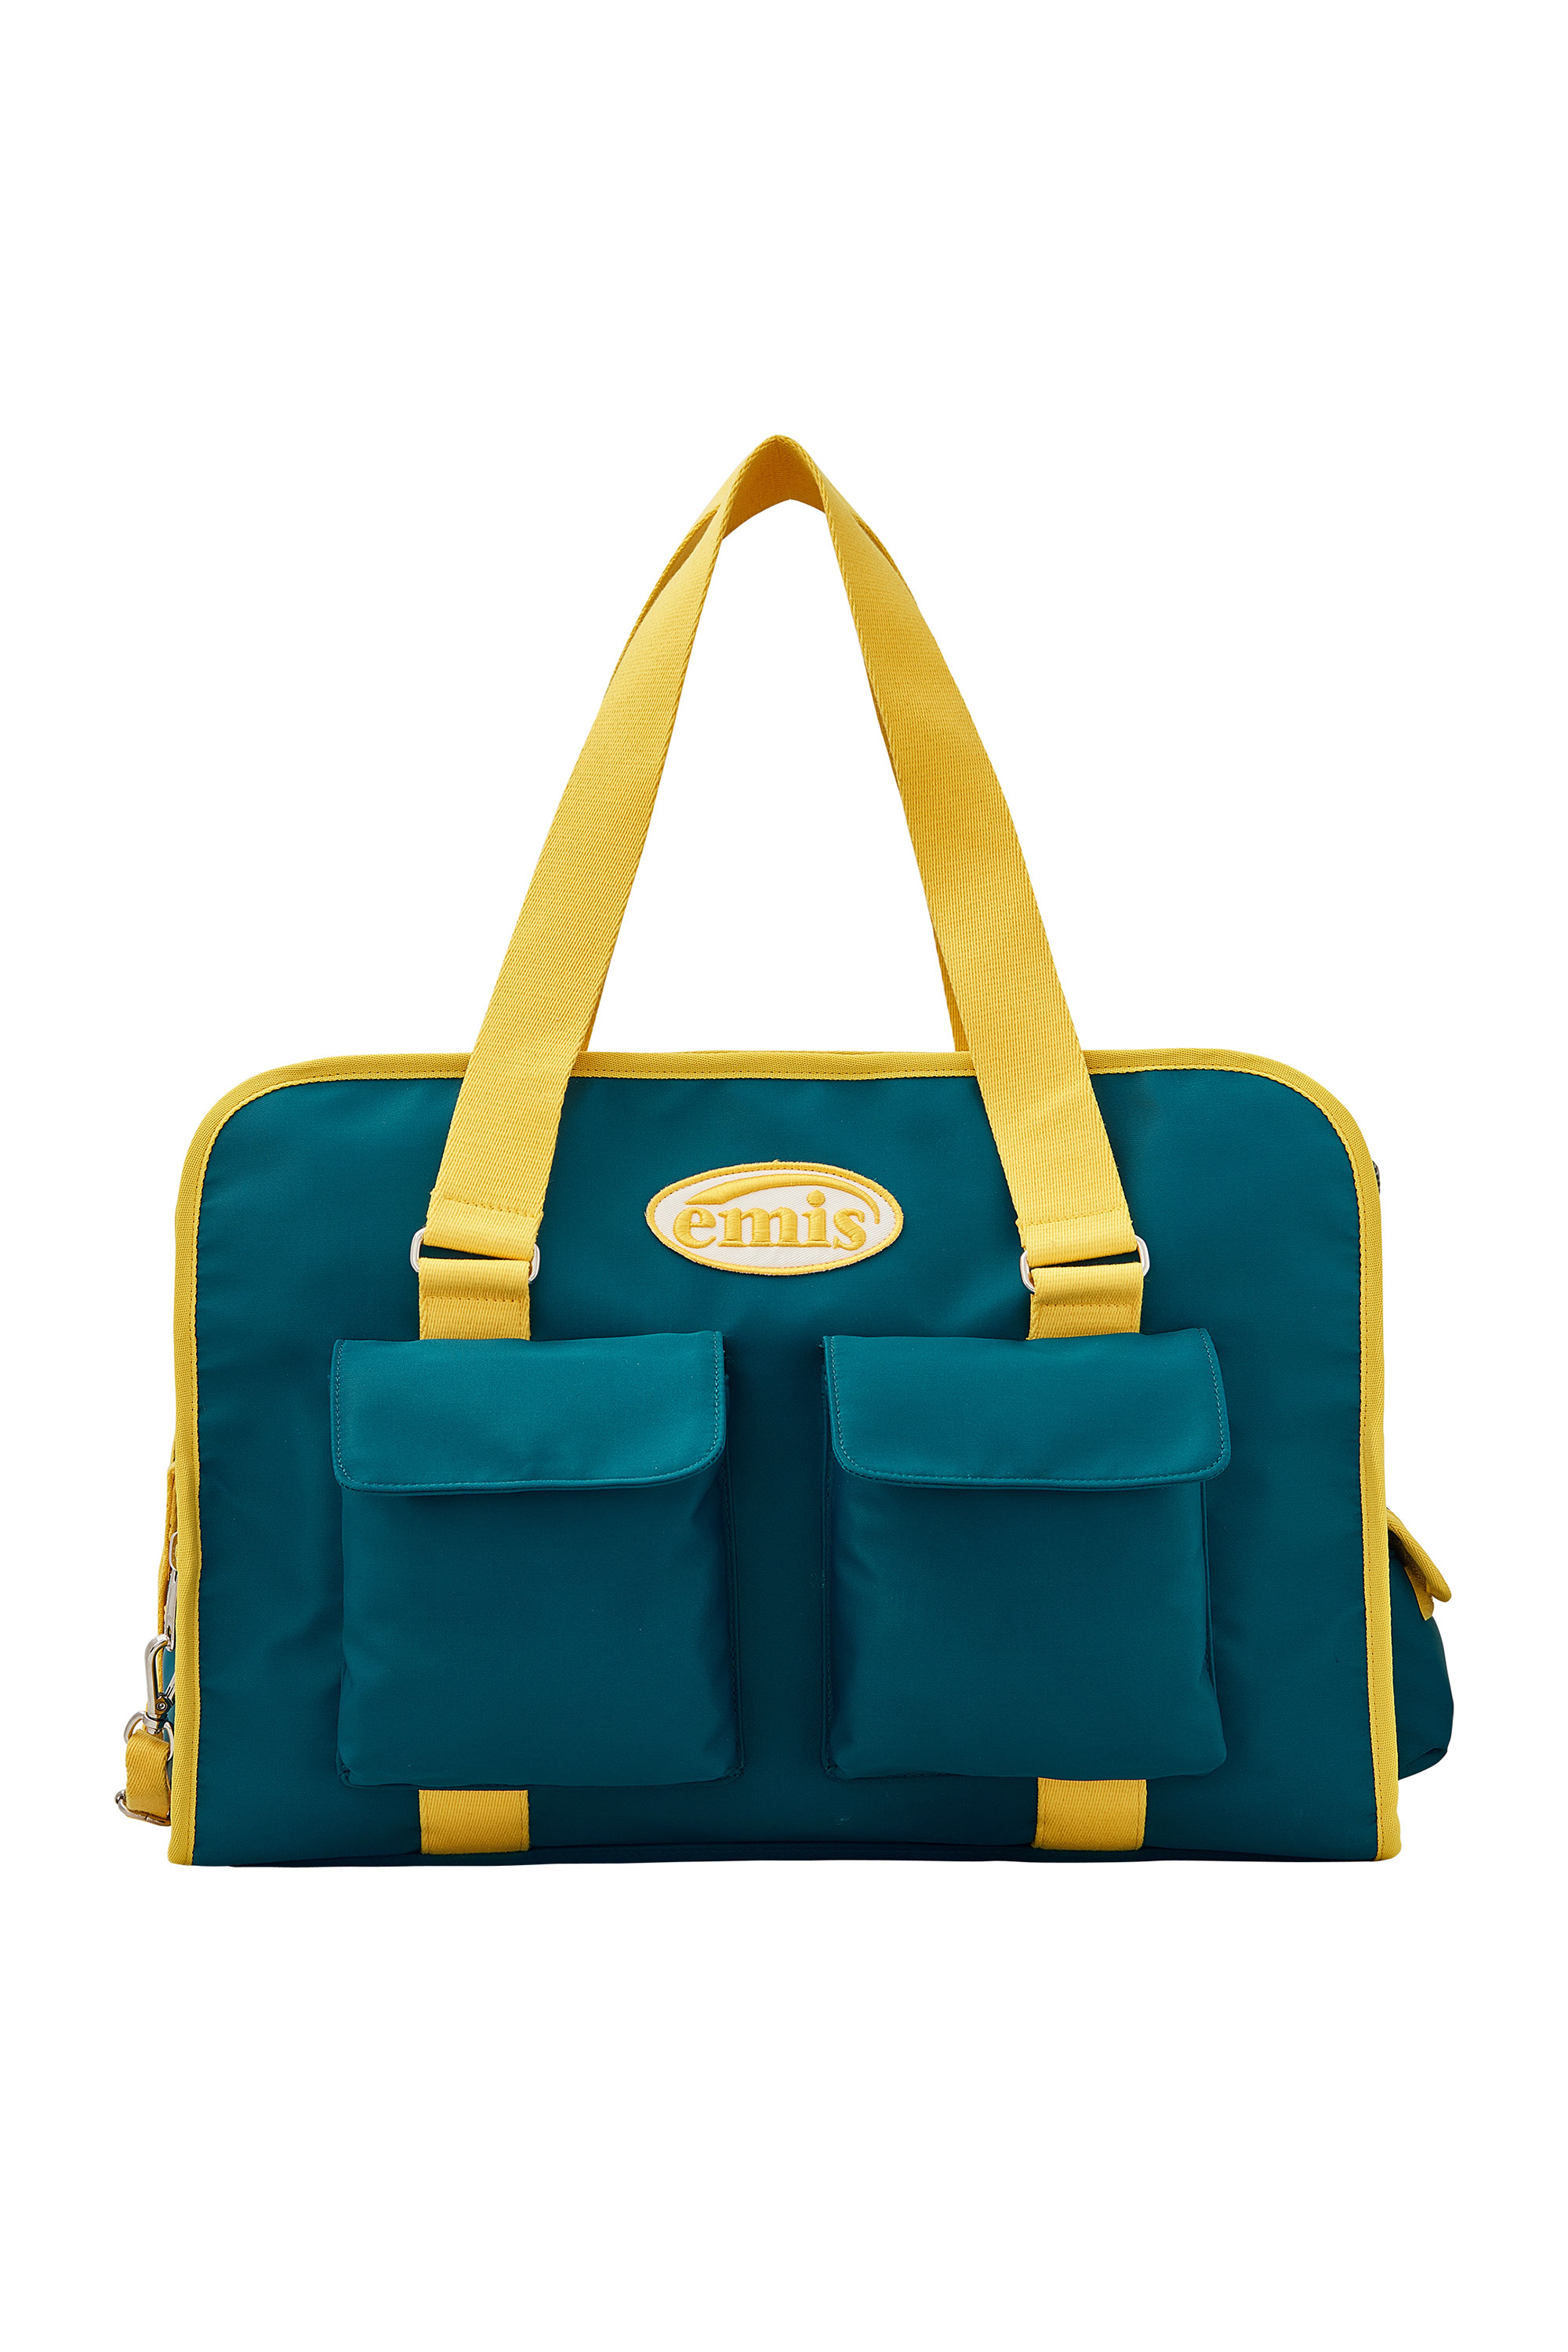 [PET] ALL-IN-ONE CARRY BAG-TEAL GREEN